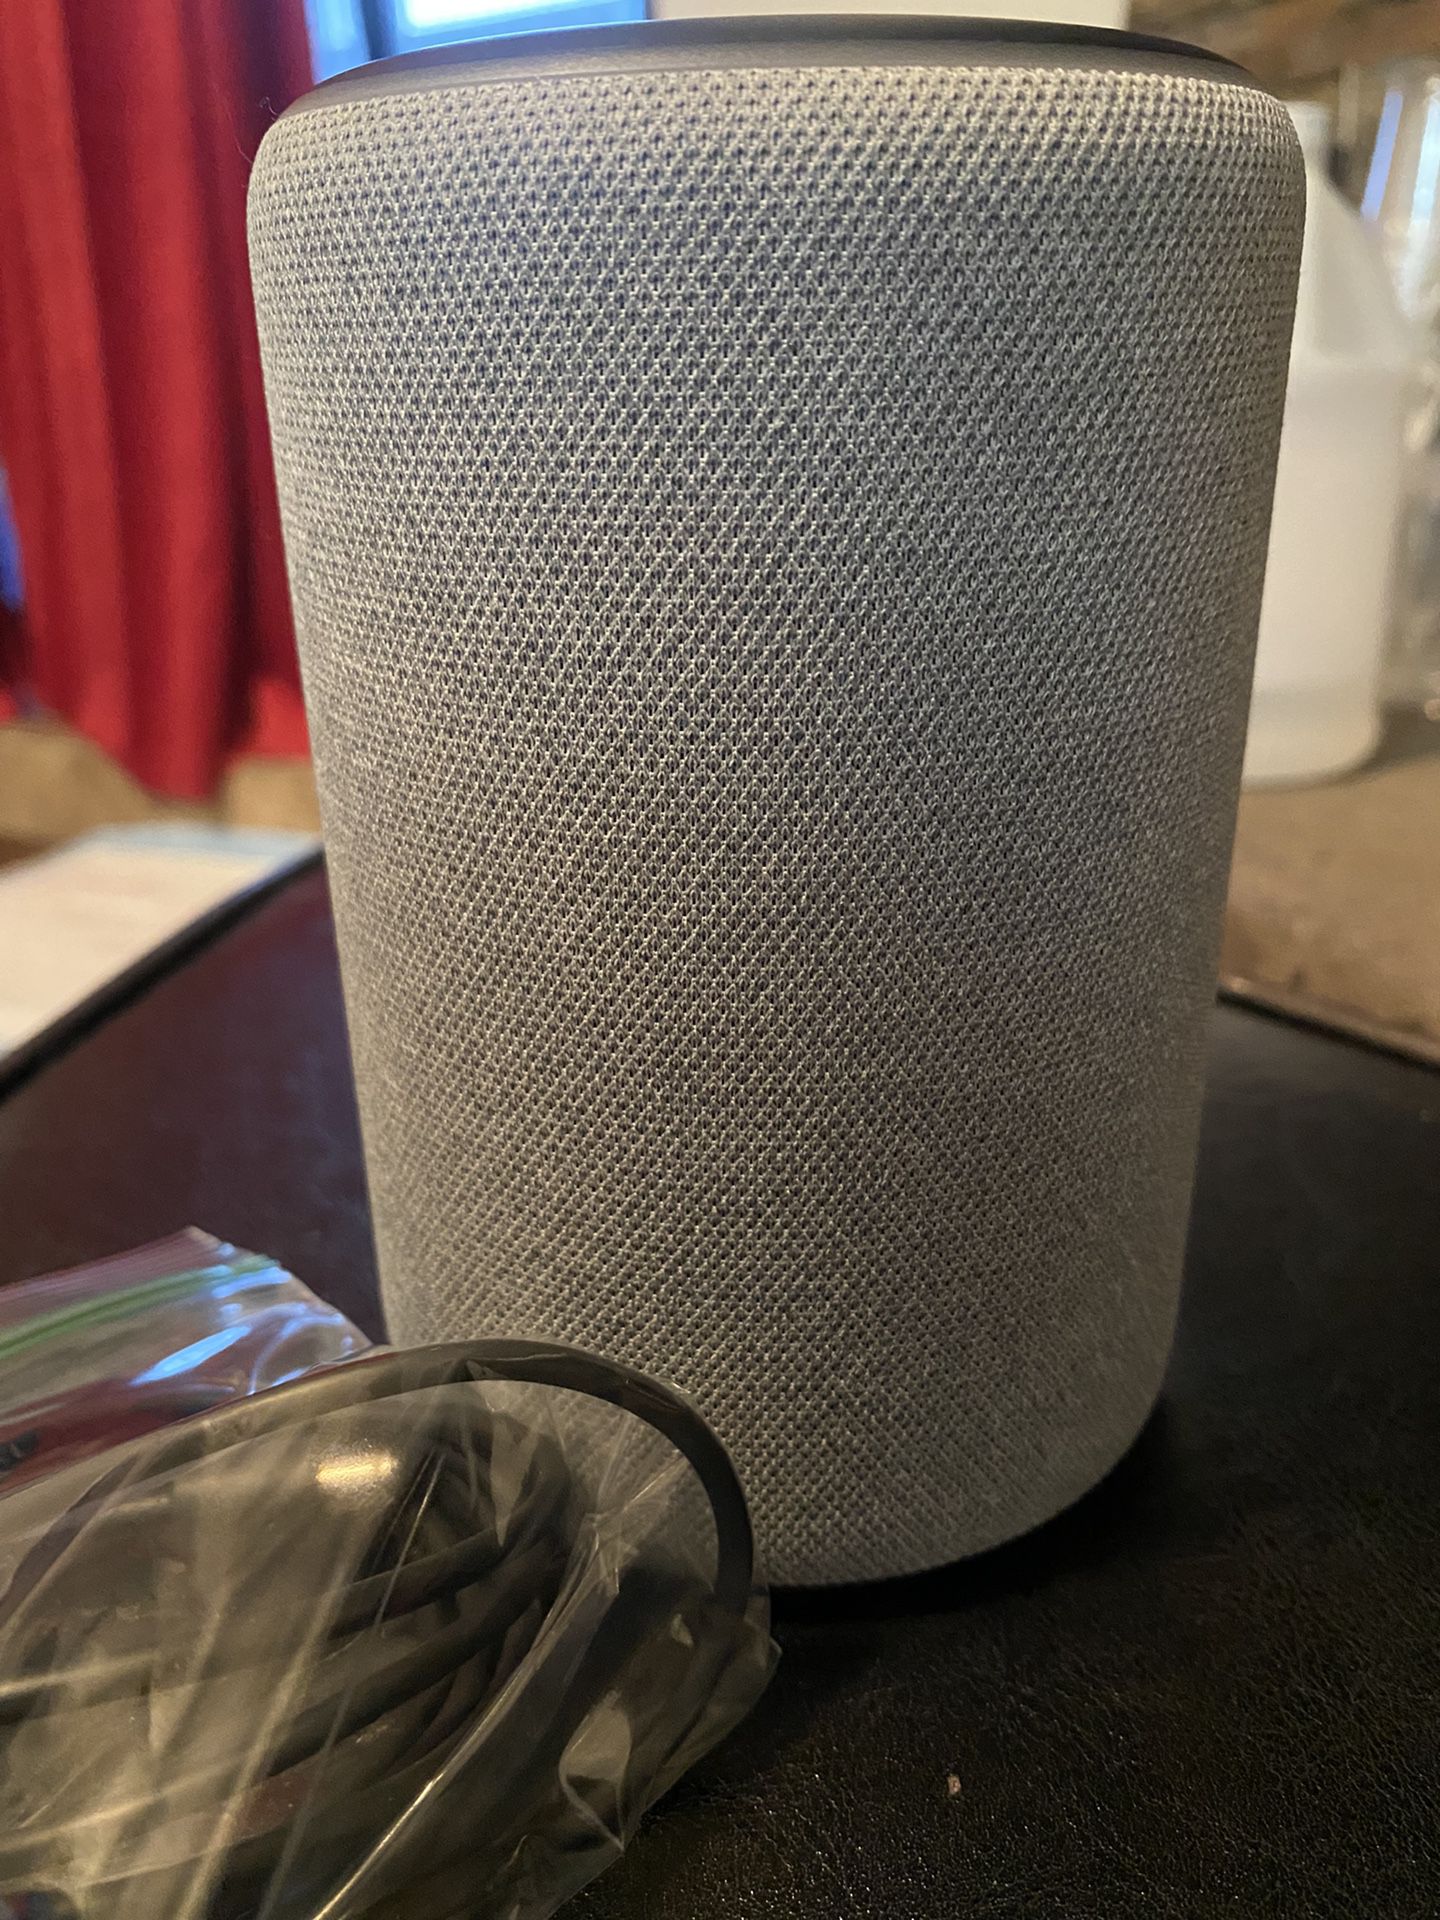 Kyst volleyball Fødested Amazon Echo Plus (2nd Gen) for Sale in Mesa, AZ - OfferUp